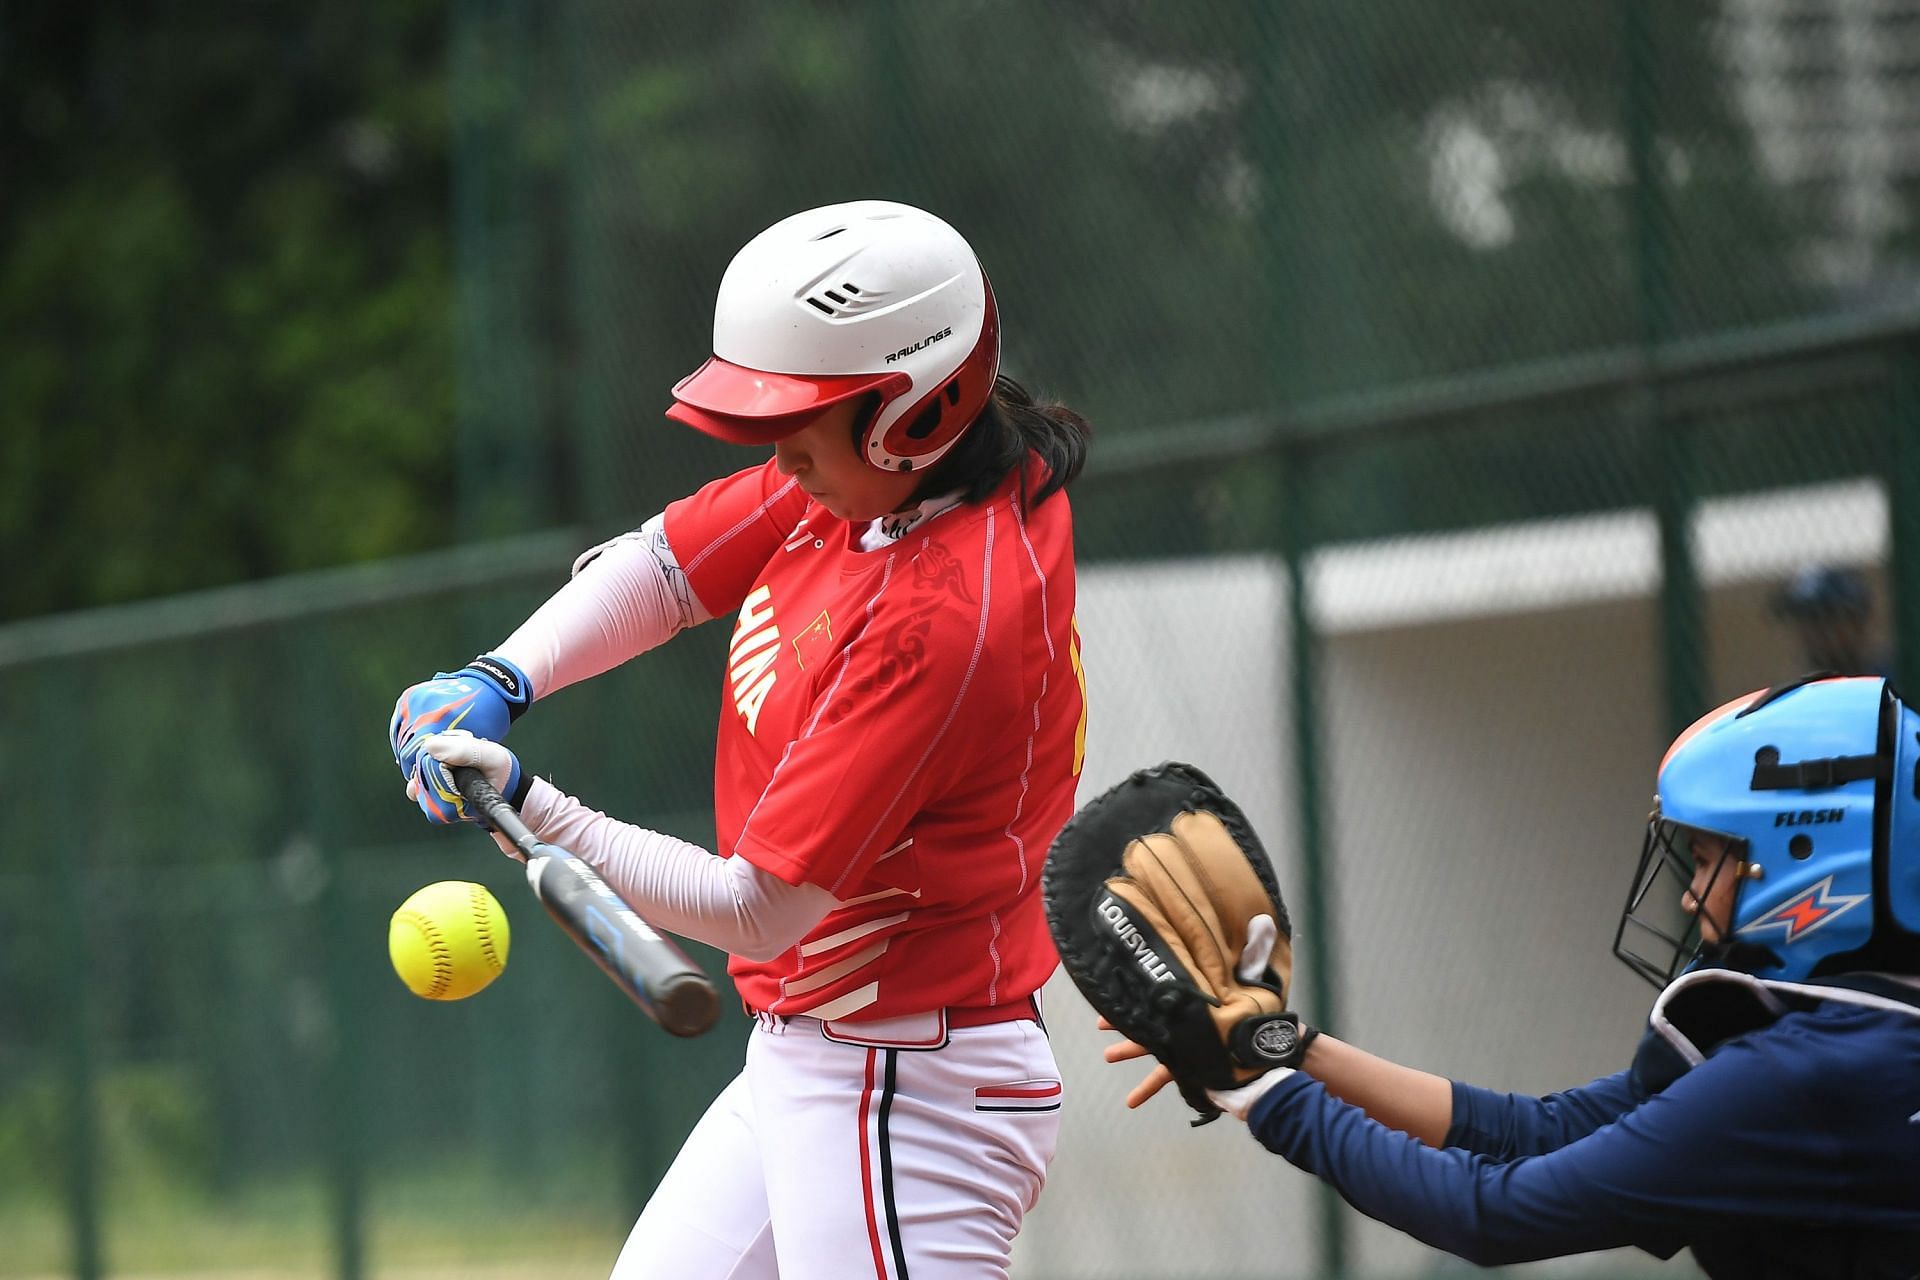 Indian women's softball team to make its debut at 2022 Asian Games in